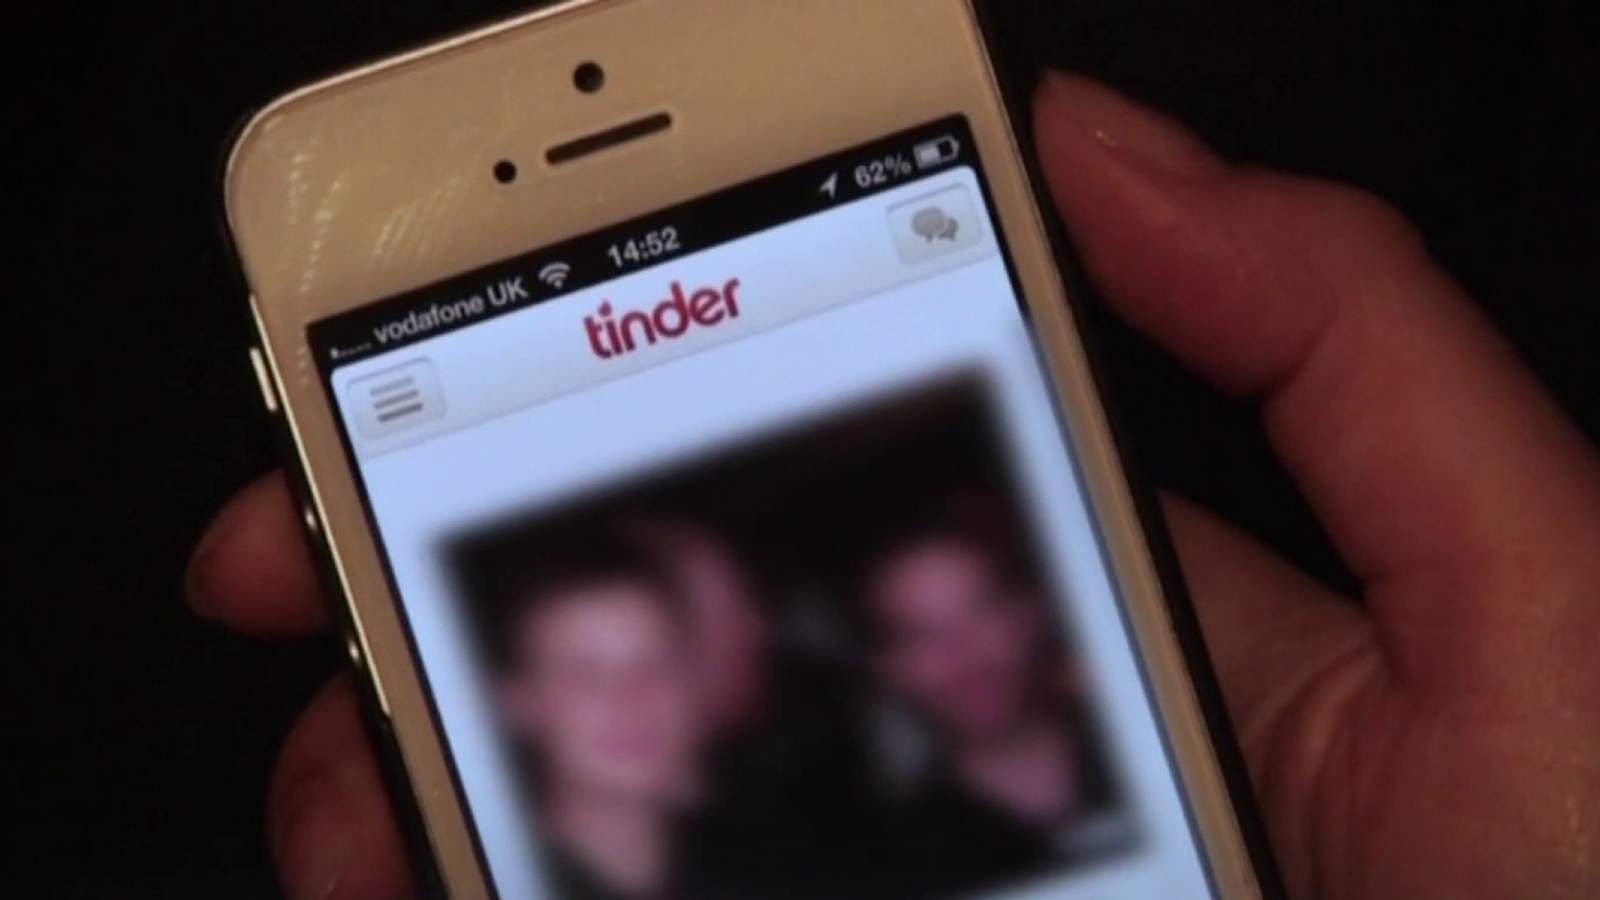 Safer Tinder dates? Check out the app’s new feature!